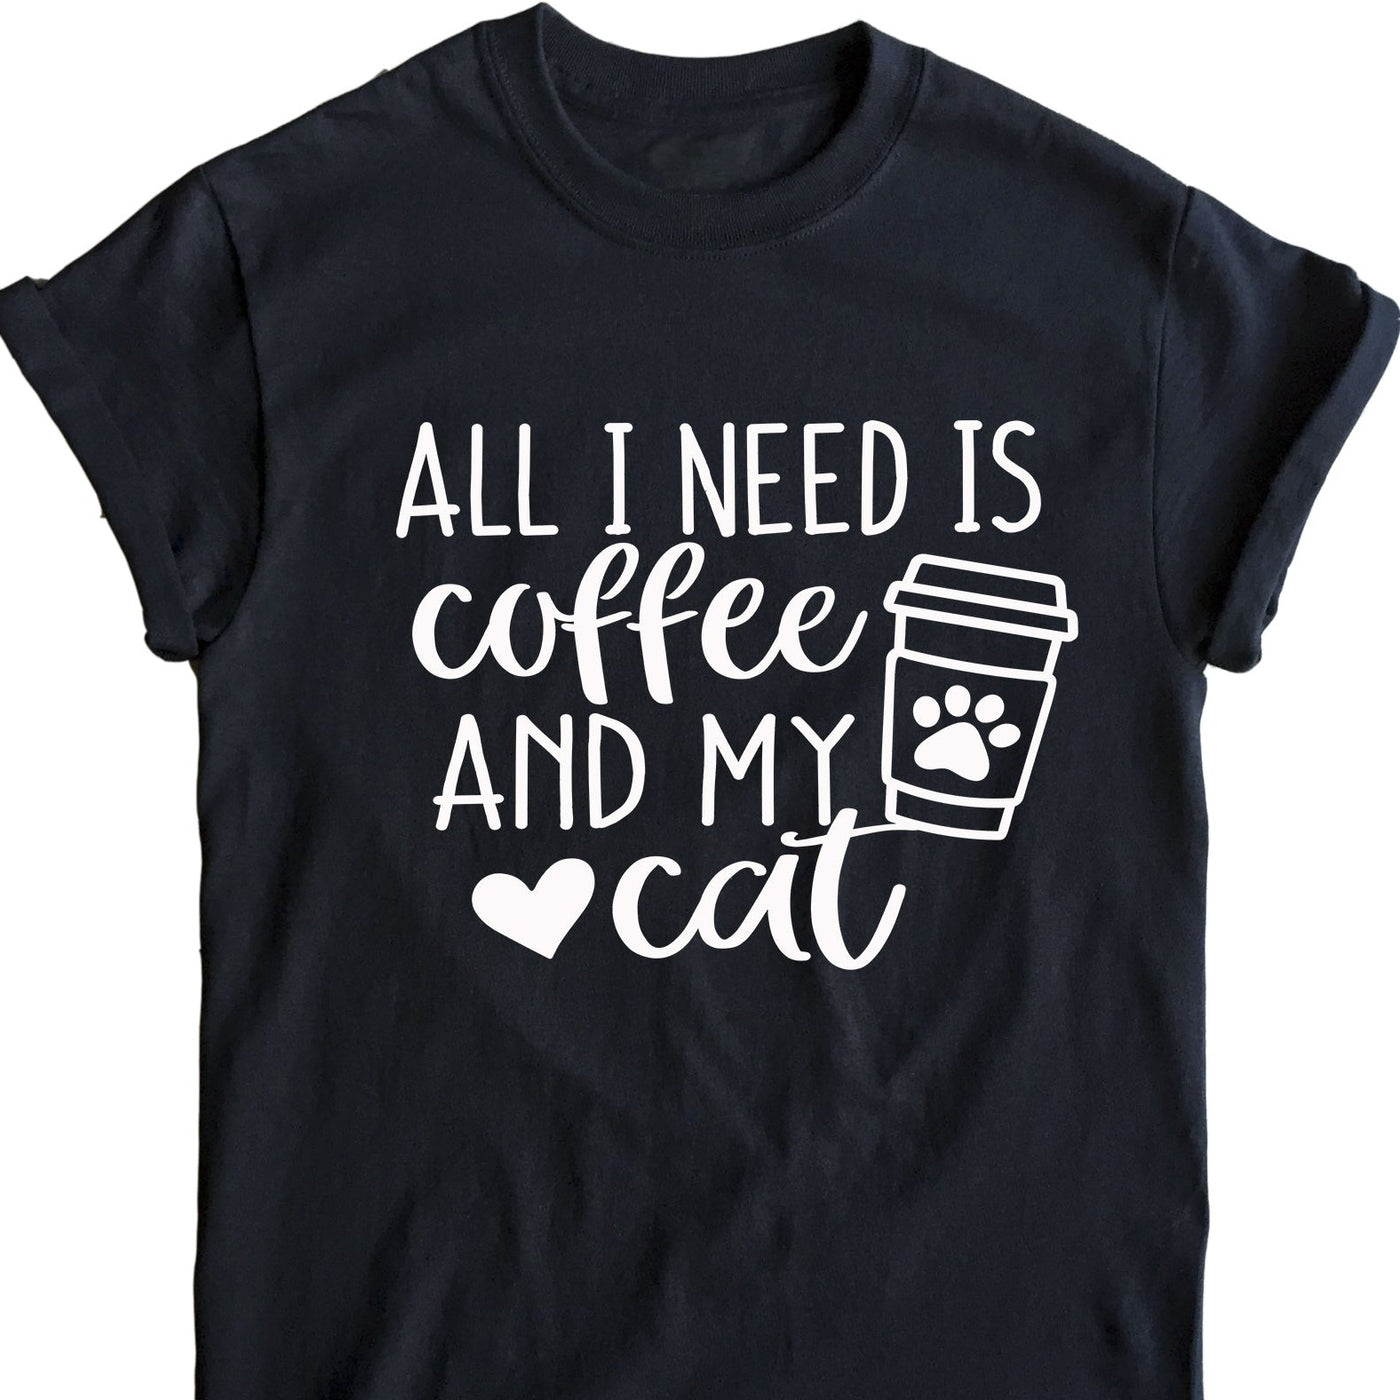 Camiseta All I need is coffee and my cat